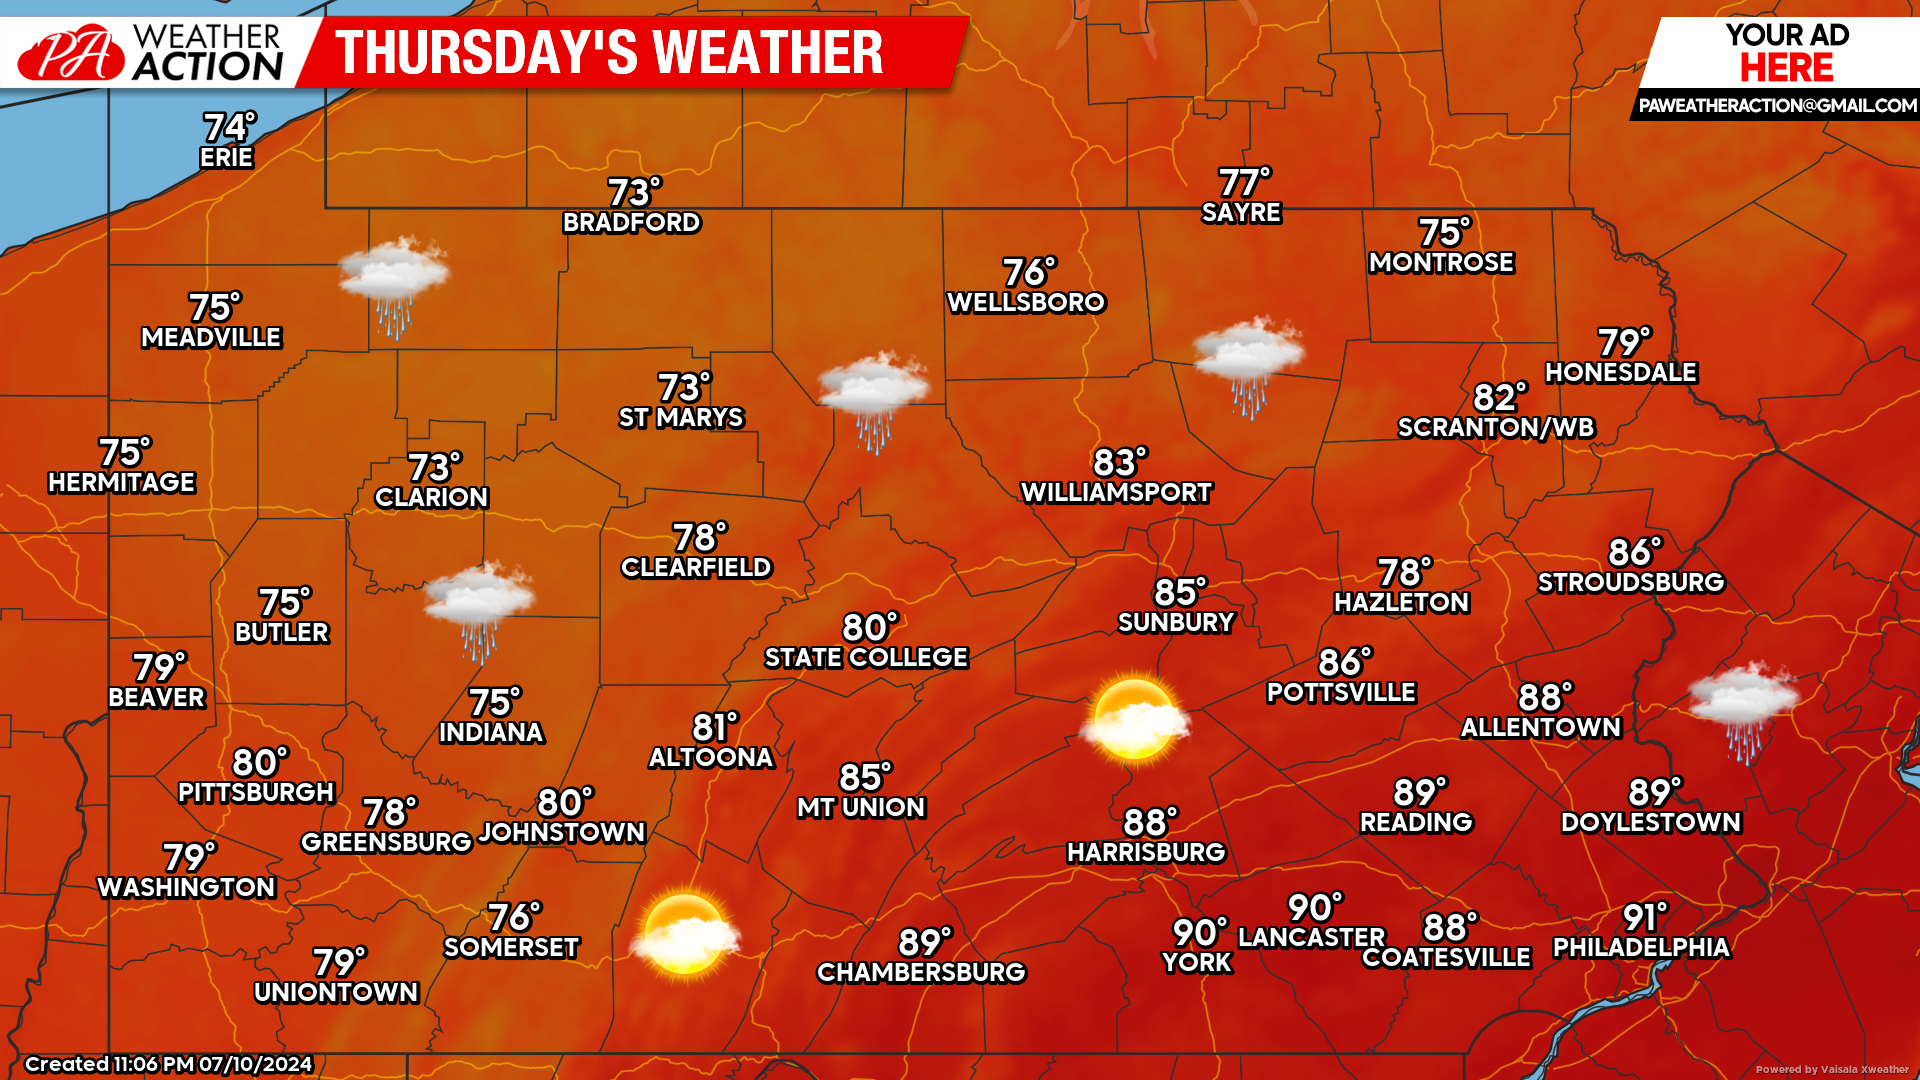 Cooler Weather Today, Hot Weather with the Chance for Thunderstorms Return Friday